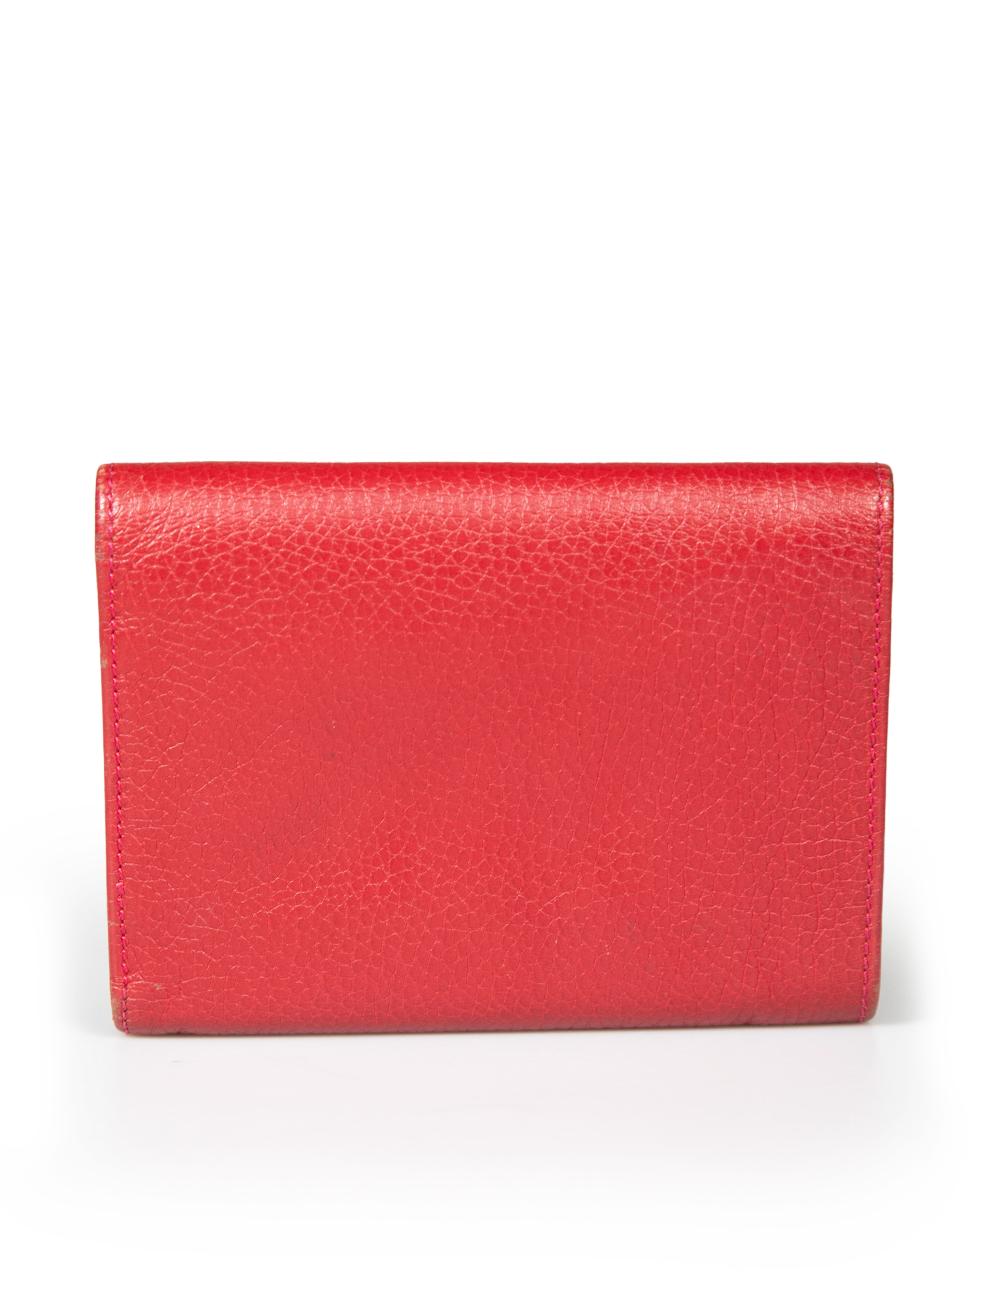 Tod's Red Leather Wallet In Good Condition For Sale In London, GB